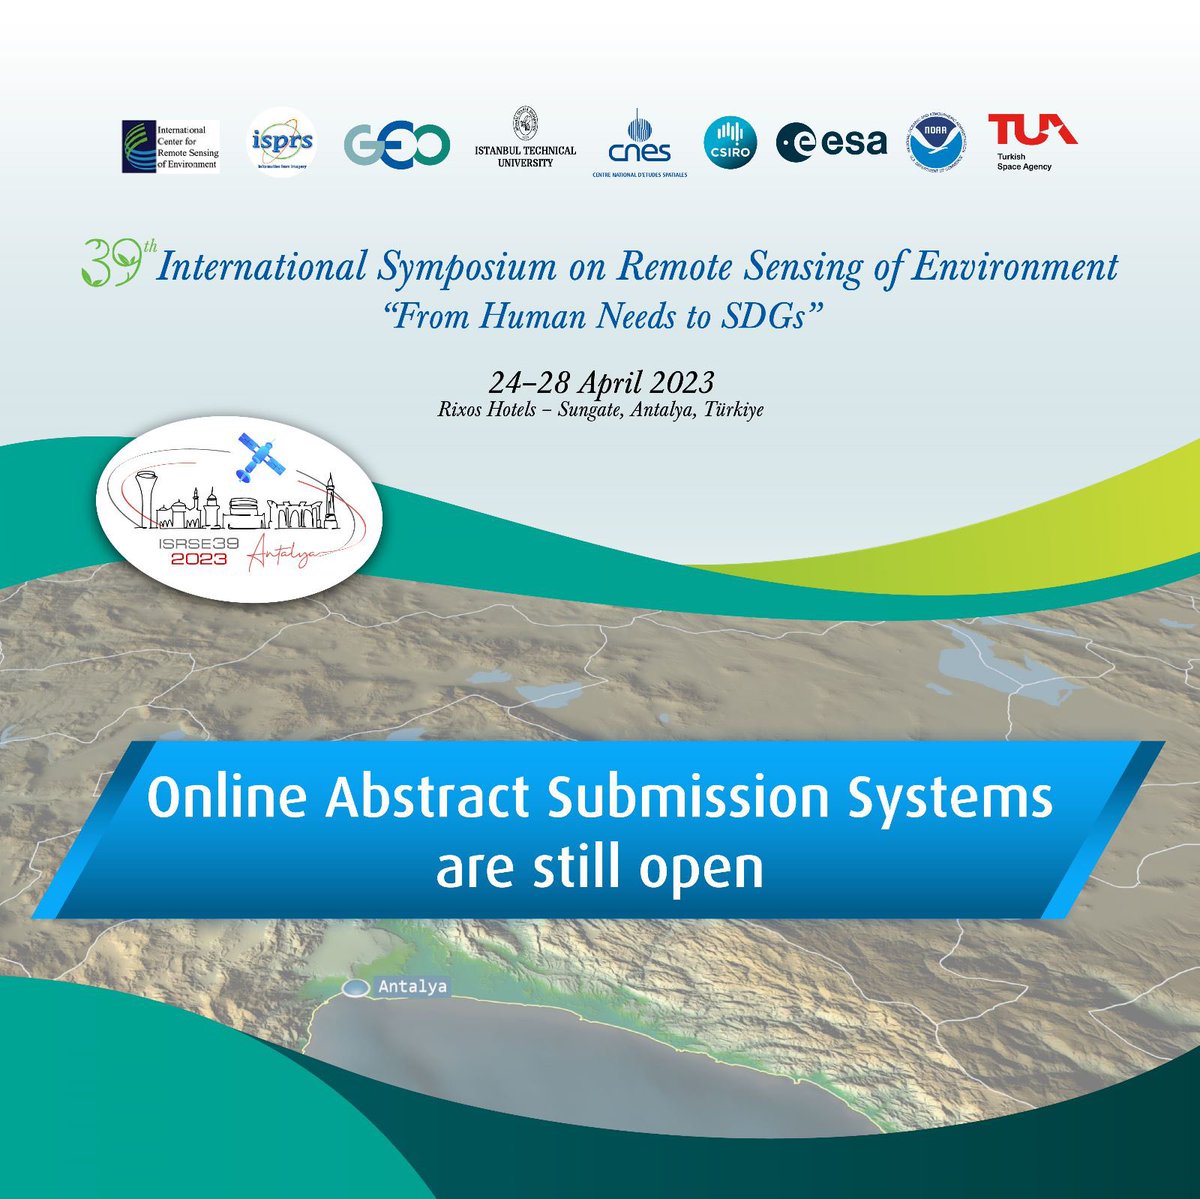 Online abstract submission systems are still open #39thinternationalsymposiumonremotesensingofenvironment #isrse39